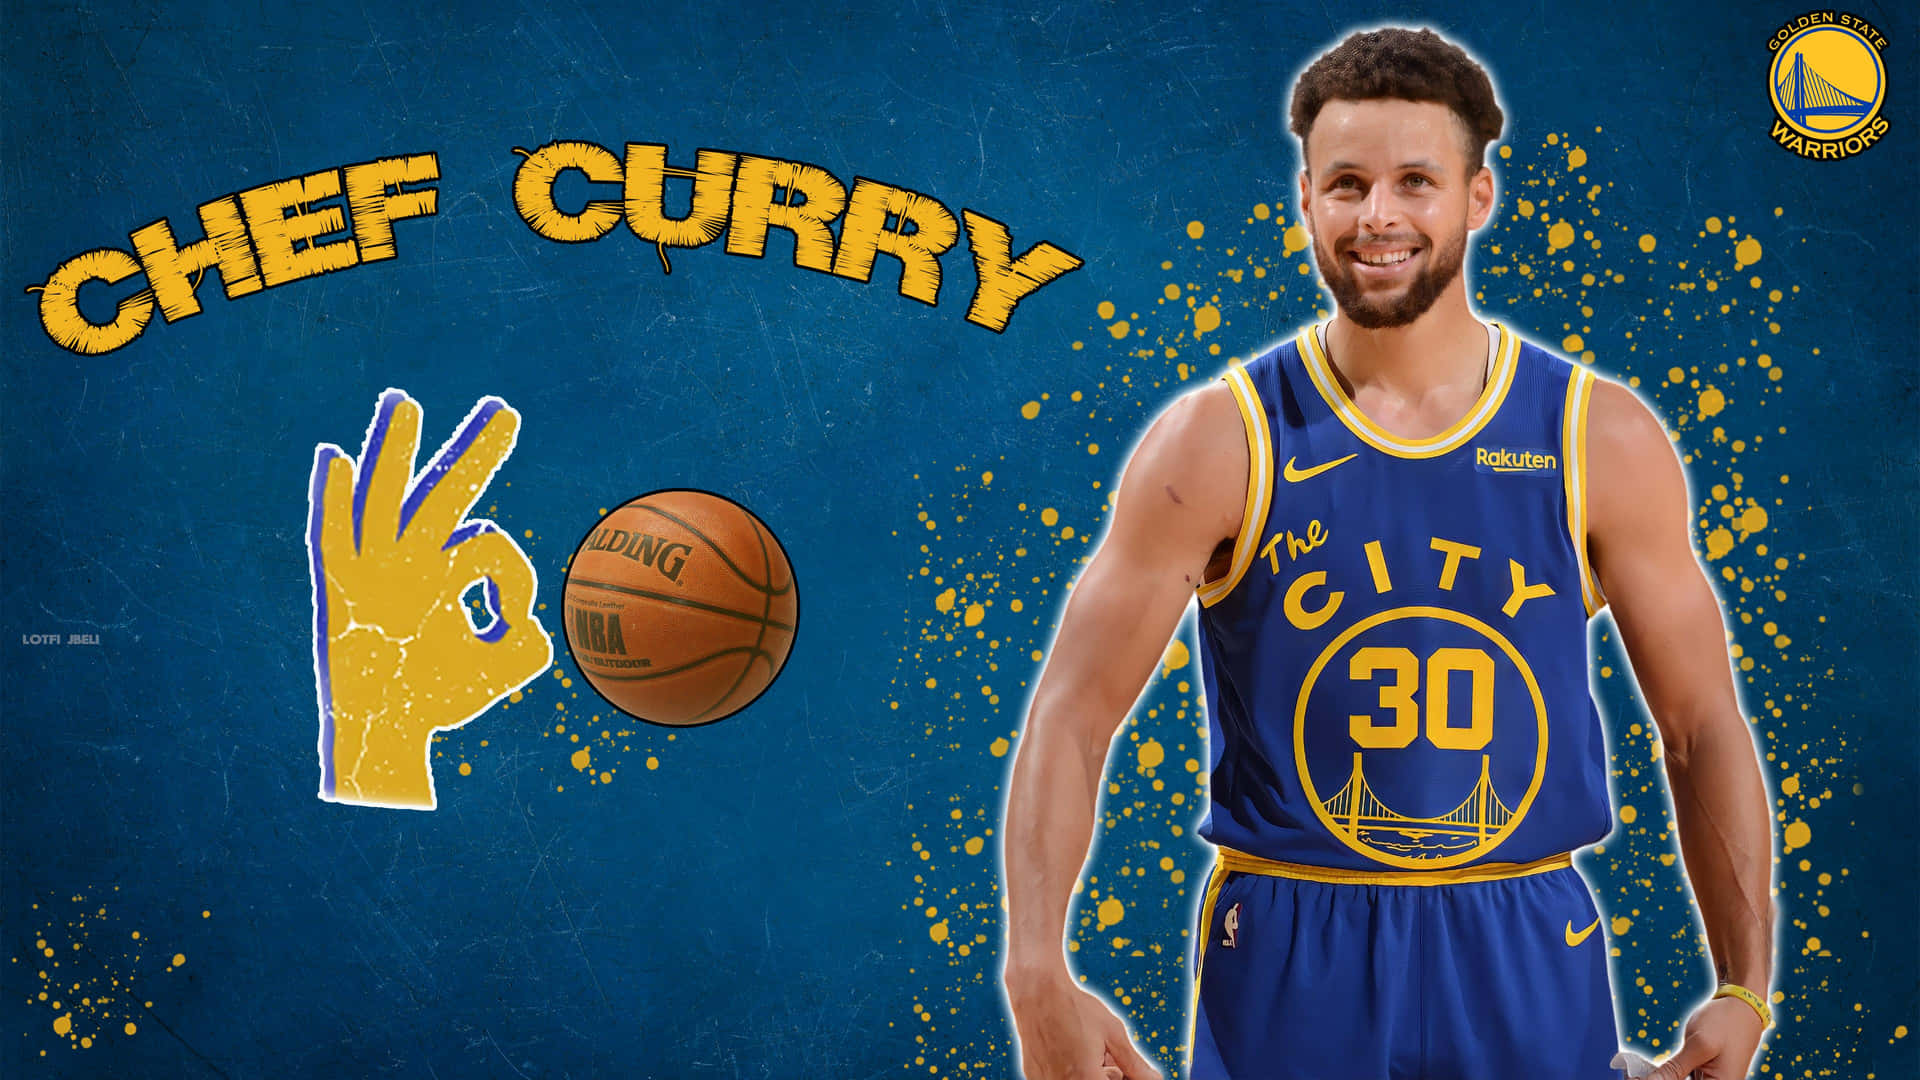 Chef Stephen Curry 4k Wallpaper